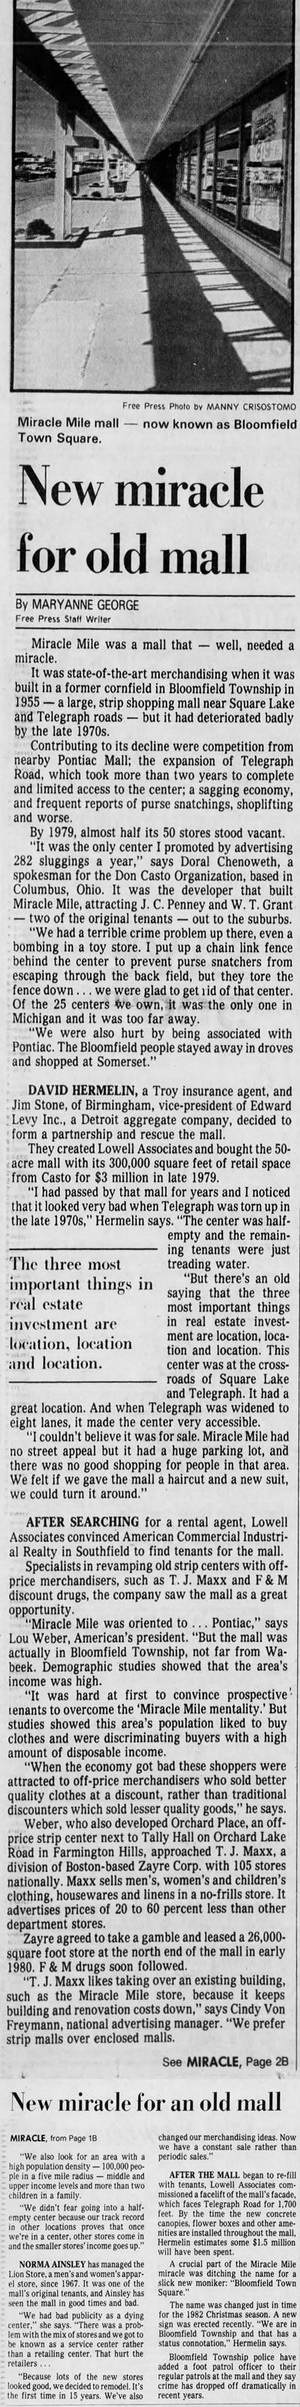 Miracle Mile Shopping Center - 1983 Article On Name Change